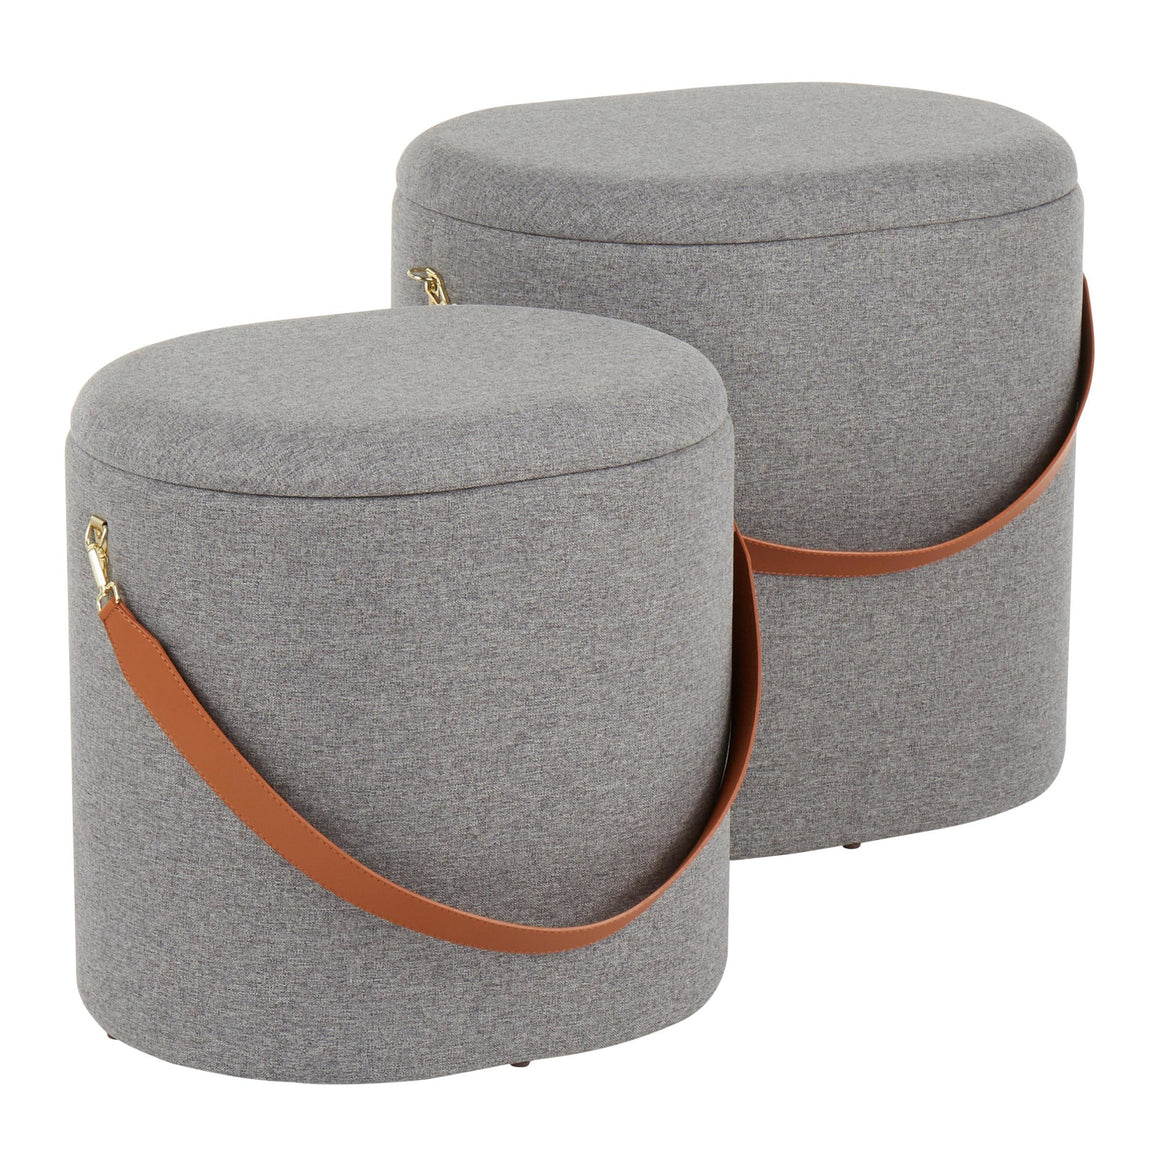 Nesting Oval Strap Contemporary Ottoman in Grey Fabric with Brown Faux Leather Strap by LumiSource